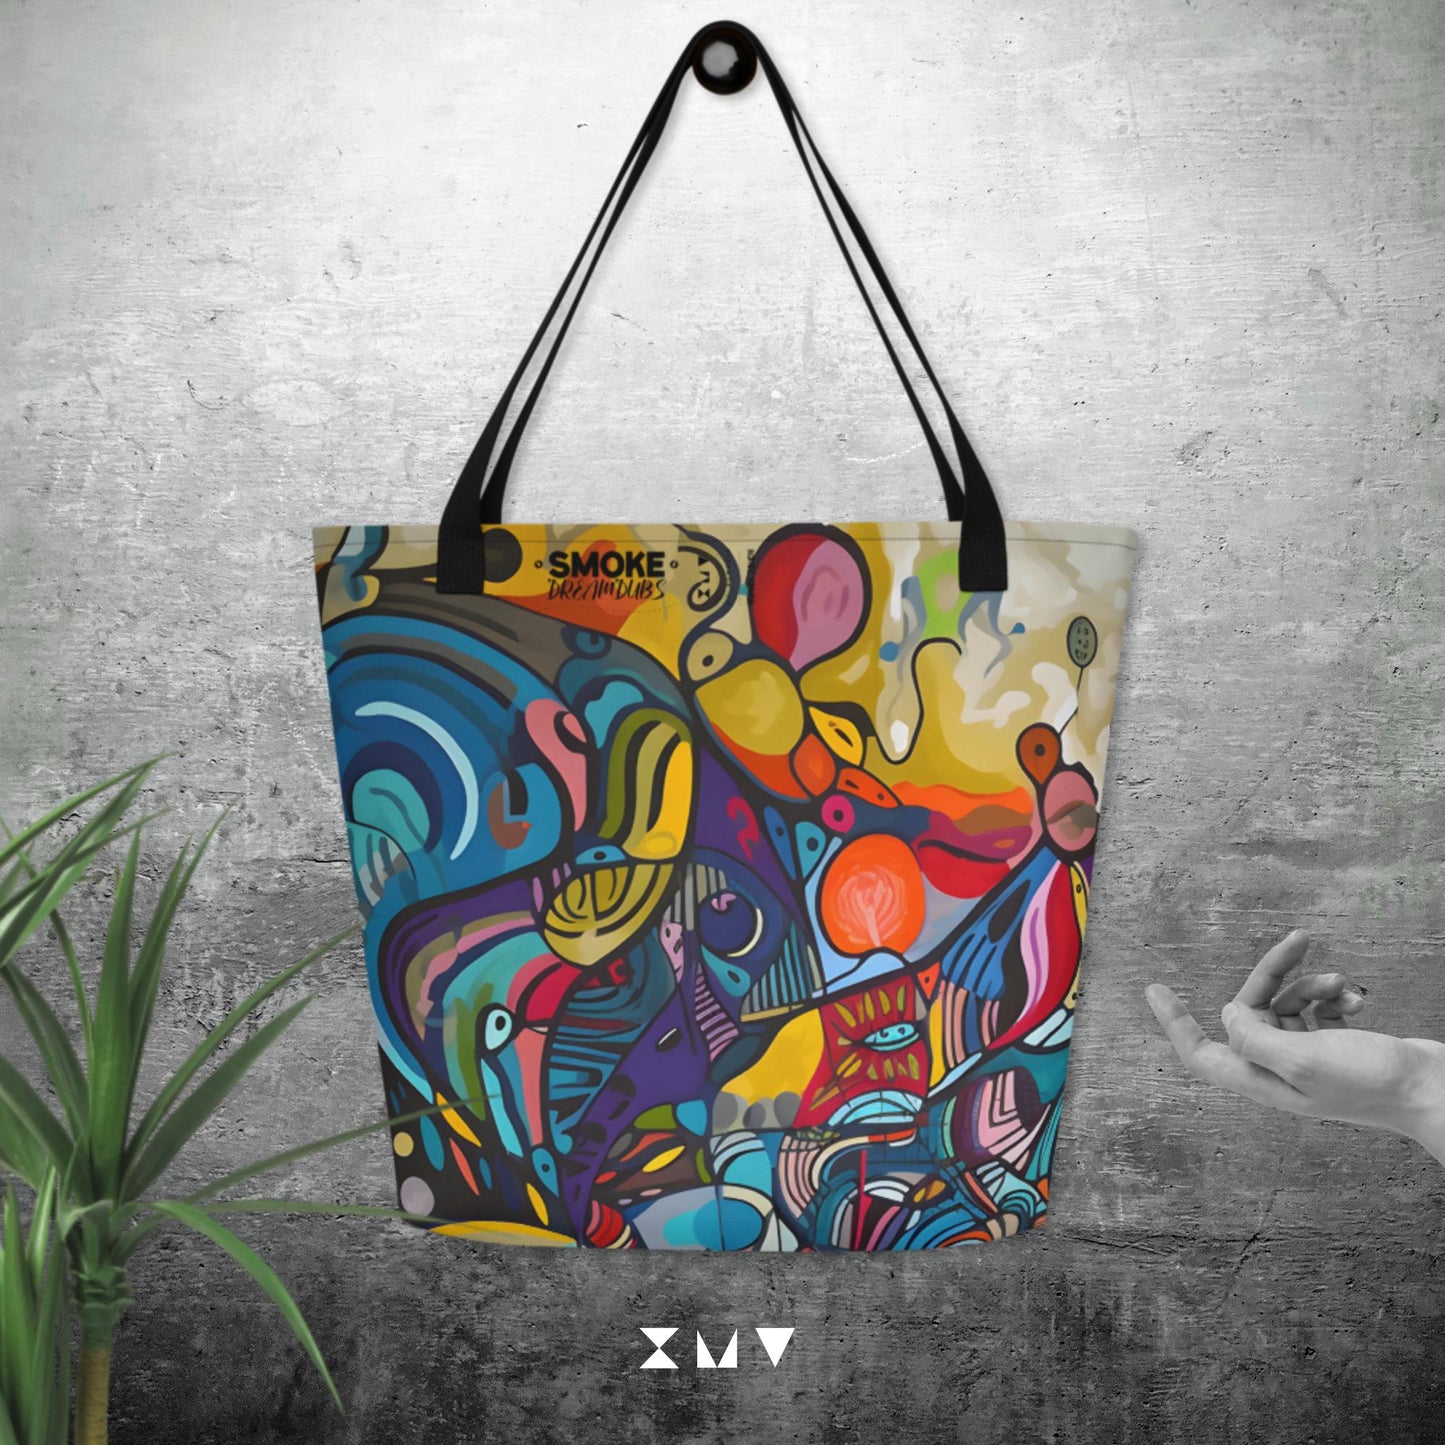 Abstractical Bag V1 by Demian Barrios - Large Tote Bag